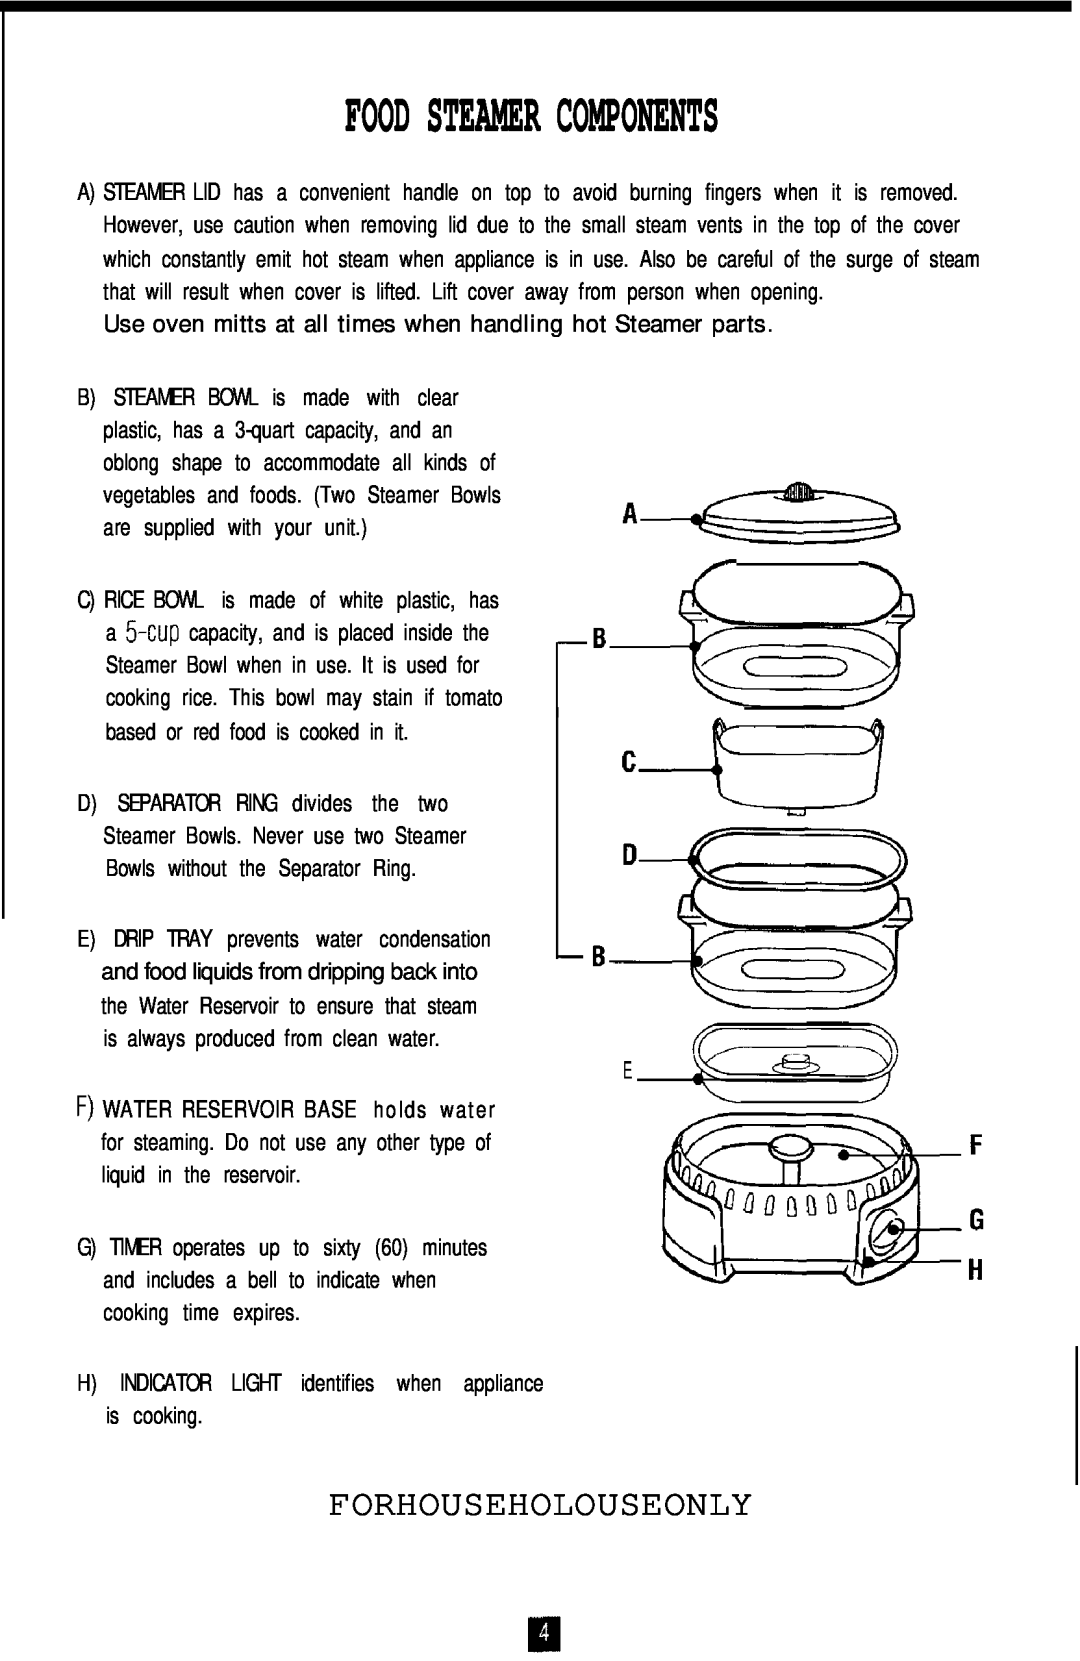 Oster 4711 Food Steamer Components, Forhouseholouseonly, A J-/-Wy, H INDICATOR LIGHT identifies when appliance is cooking 